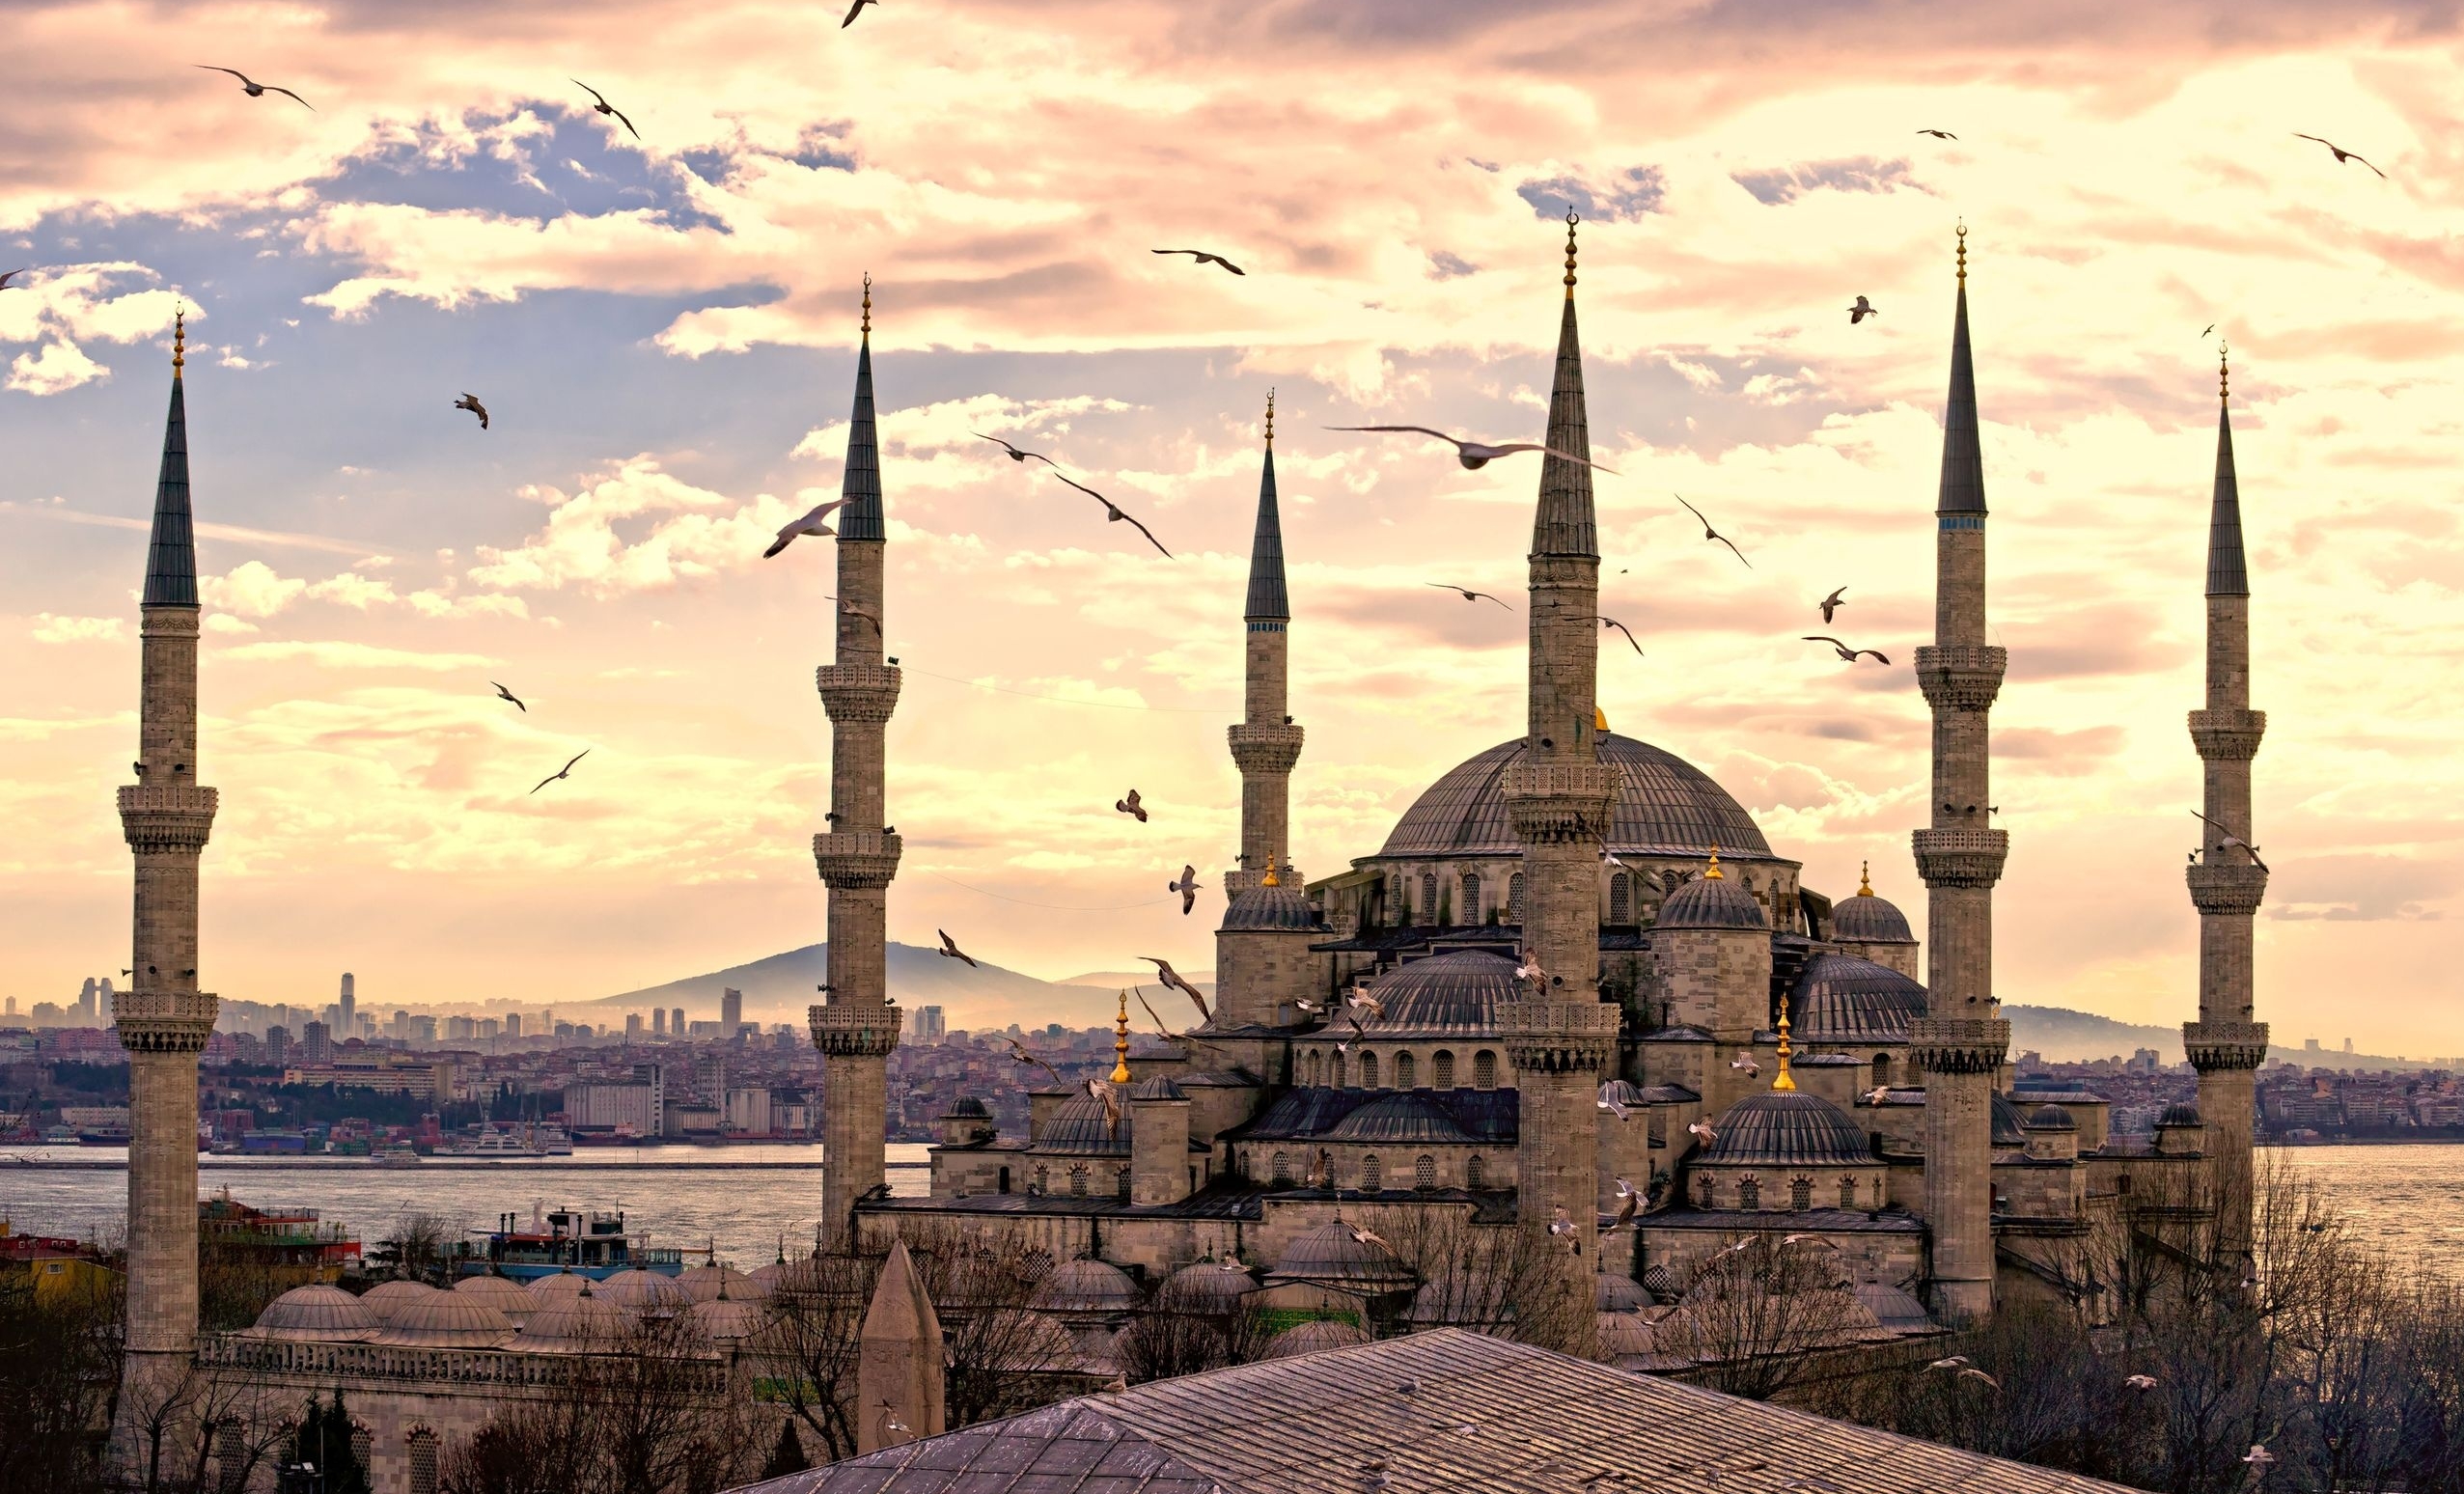 sultan_ahmed_mosque_istanbul_turkey-wallpaper-2560x1600